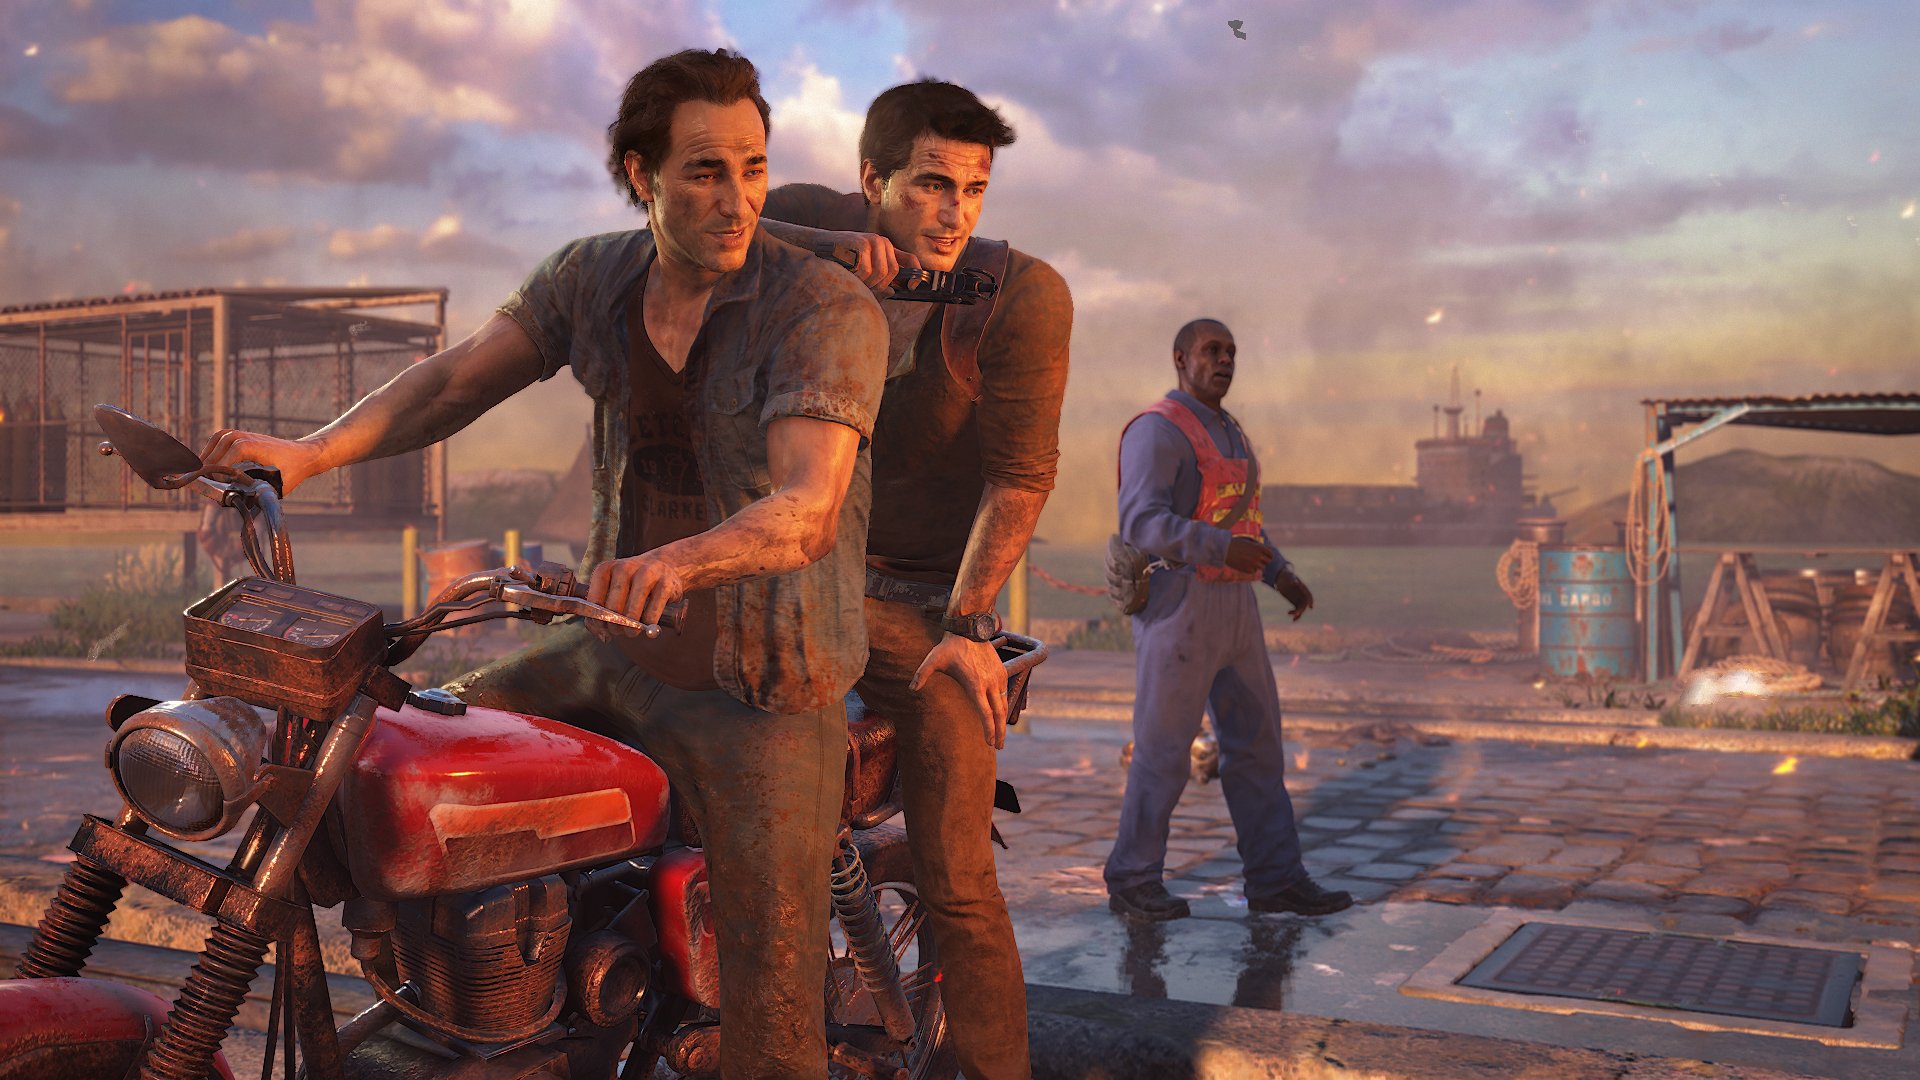 Uncharted hero Nathan Drake is sitting on a motorcycle with his brother